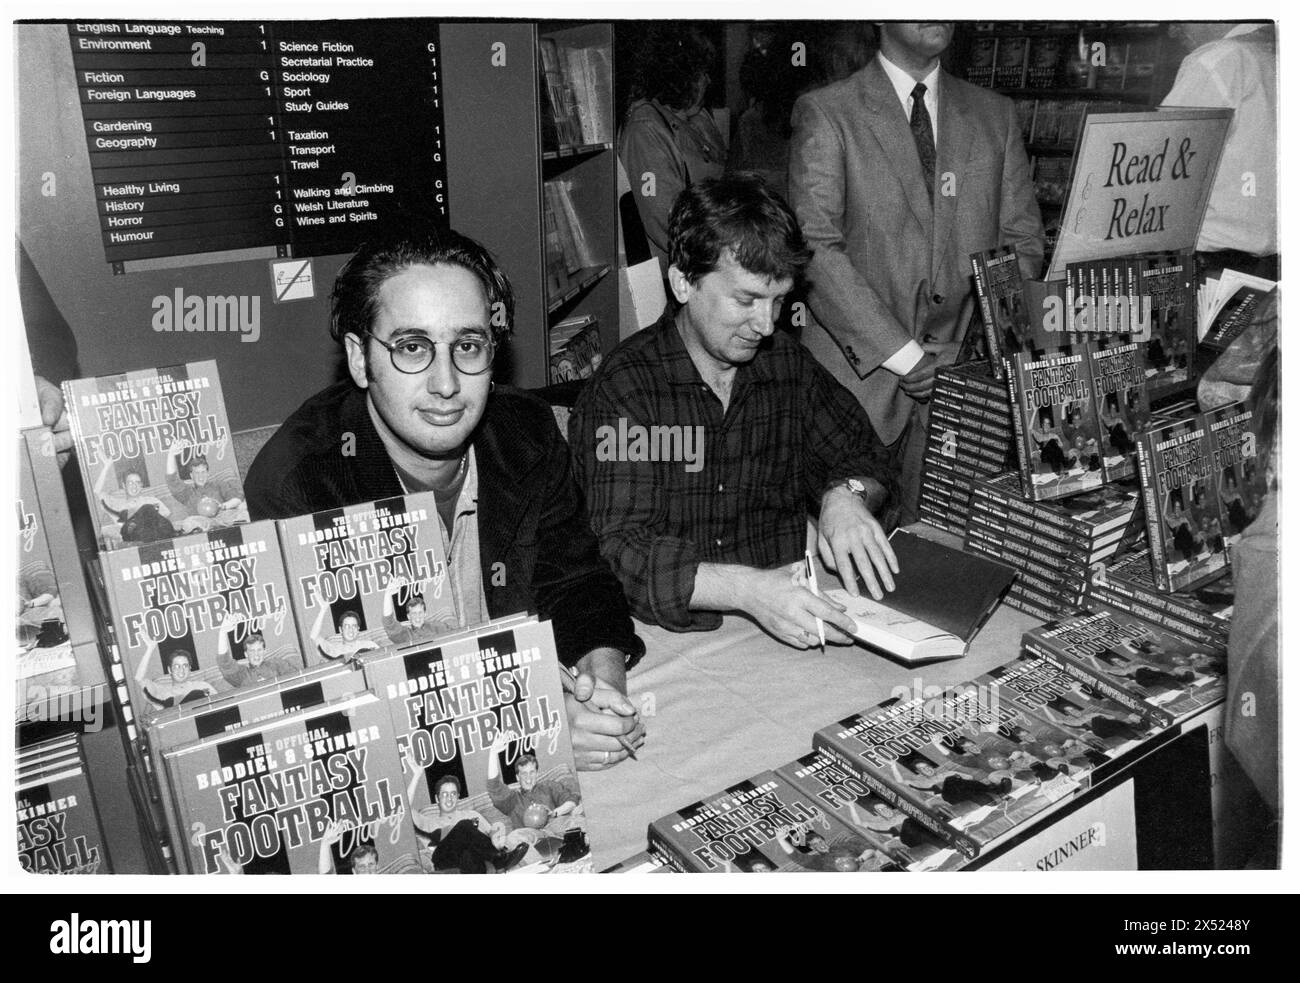 DAVID BADDIEL, FRANK SKINNER, FANTASY FOOTBALL, 1995: David Baddiel and Frank Skinner sign copies of their new book Baddiel and Skinner's Fantasy Football Diary at the peak of their fame at Cardiff Waterstone's, Cardiff, Wales, UK on 6 October 1995. Photo: Rob Watkins. INFO: Baddiel and Skinner's Fantasy Football, a British television show aired in the late '90s and early 2000s, blended humor and football analysis. Hosted by comedians David Baddiel and Frank Skinner, it became a cultural phenomenon, popularizing fantasy football and captivating audiences with its irreverent charm. Stock Photo